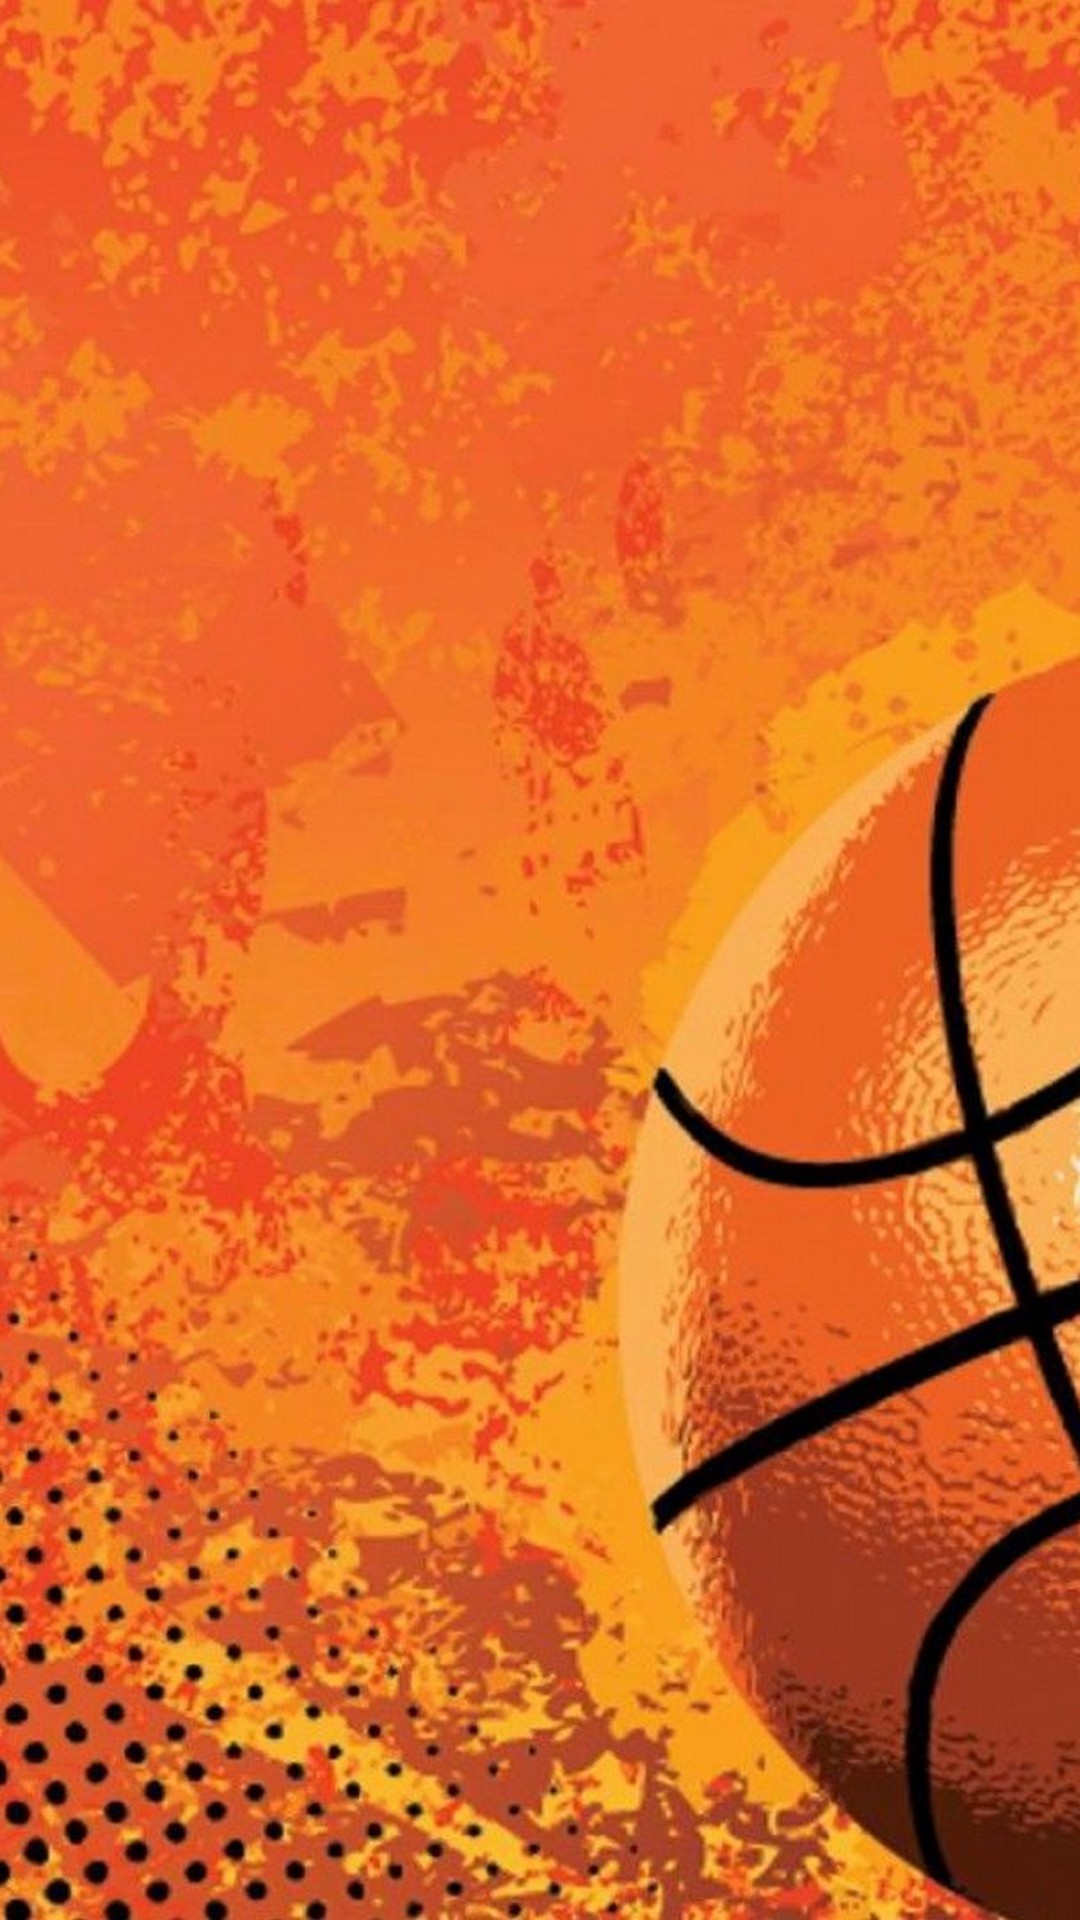 Basketball Games Hd Wallpaper For Iphone With Image - Tarpaulin Basketball League Background - HD Wallpaper 